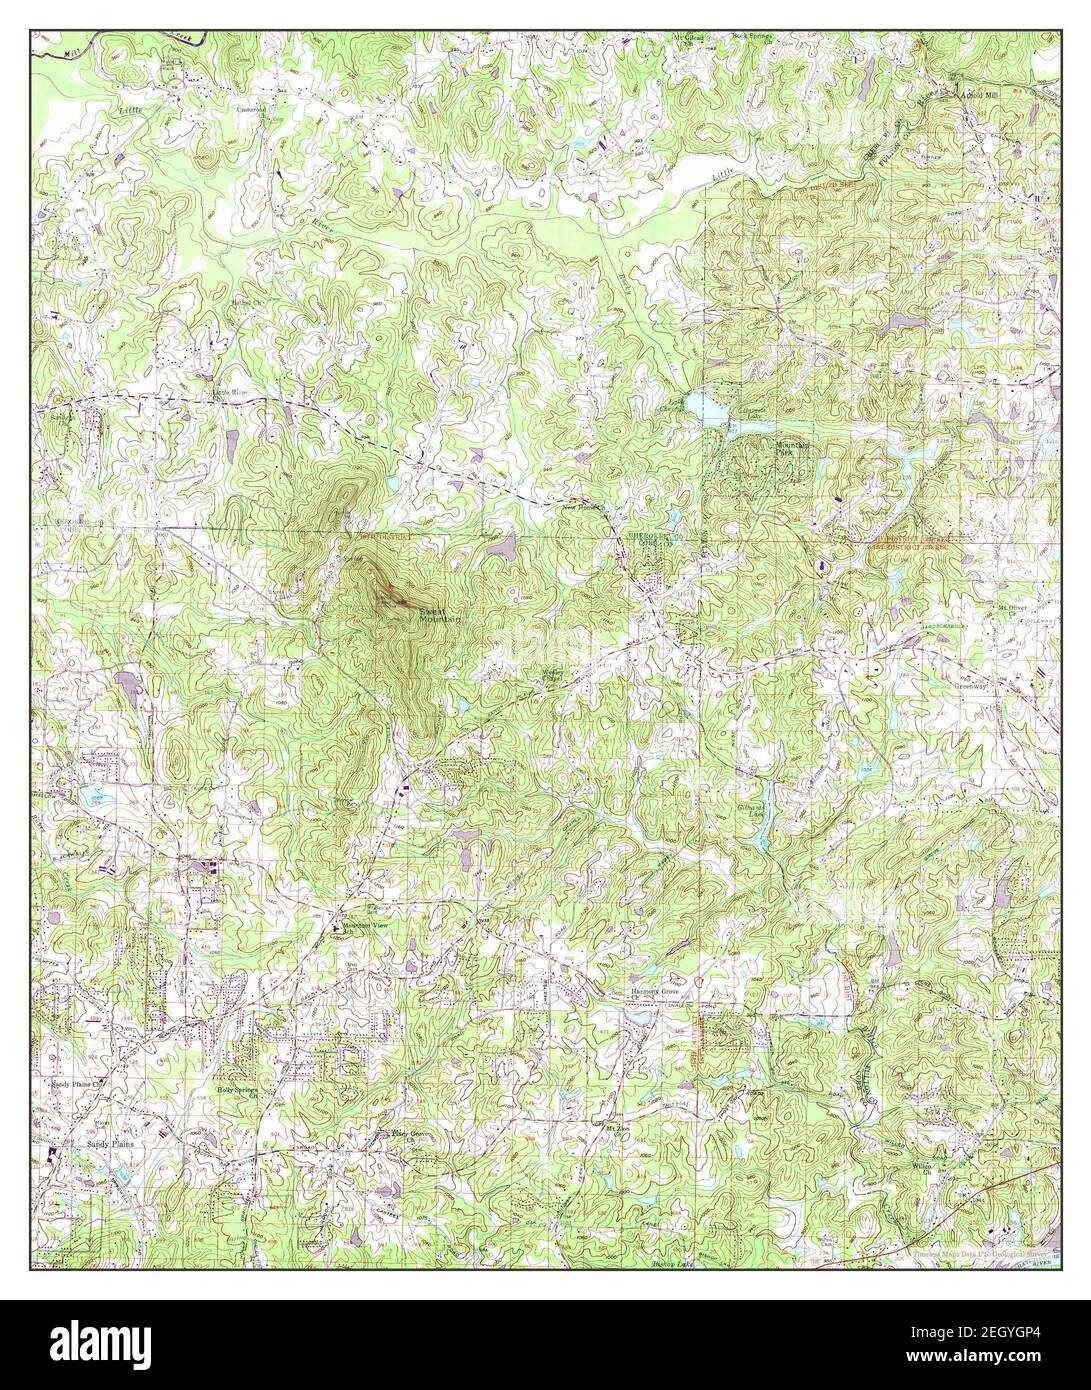 Mountain Park, Georgia, map 1956, 1:24000, United States of America by Timeless Maps, data U.S. Geological Survey Stock Photo